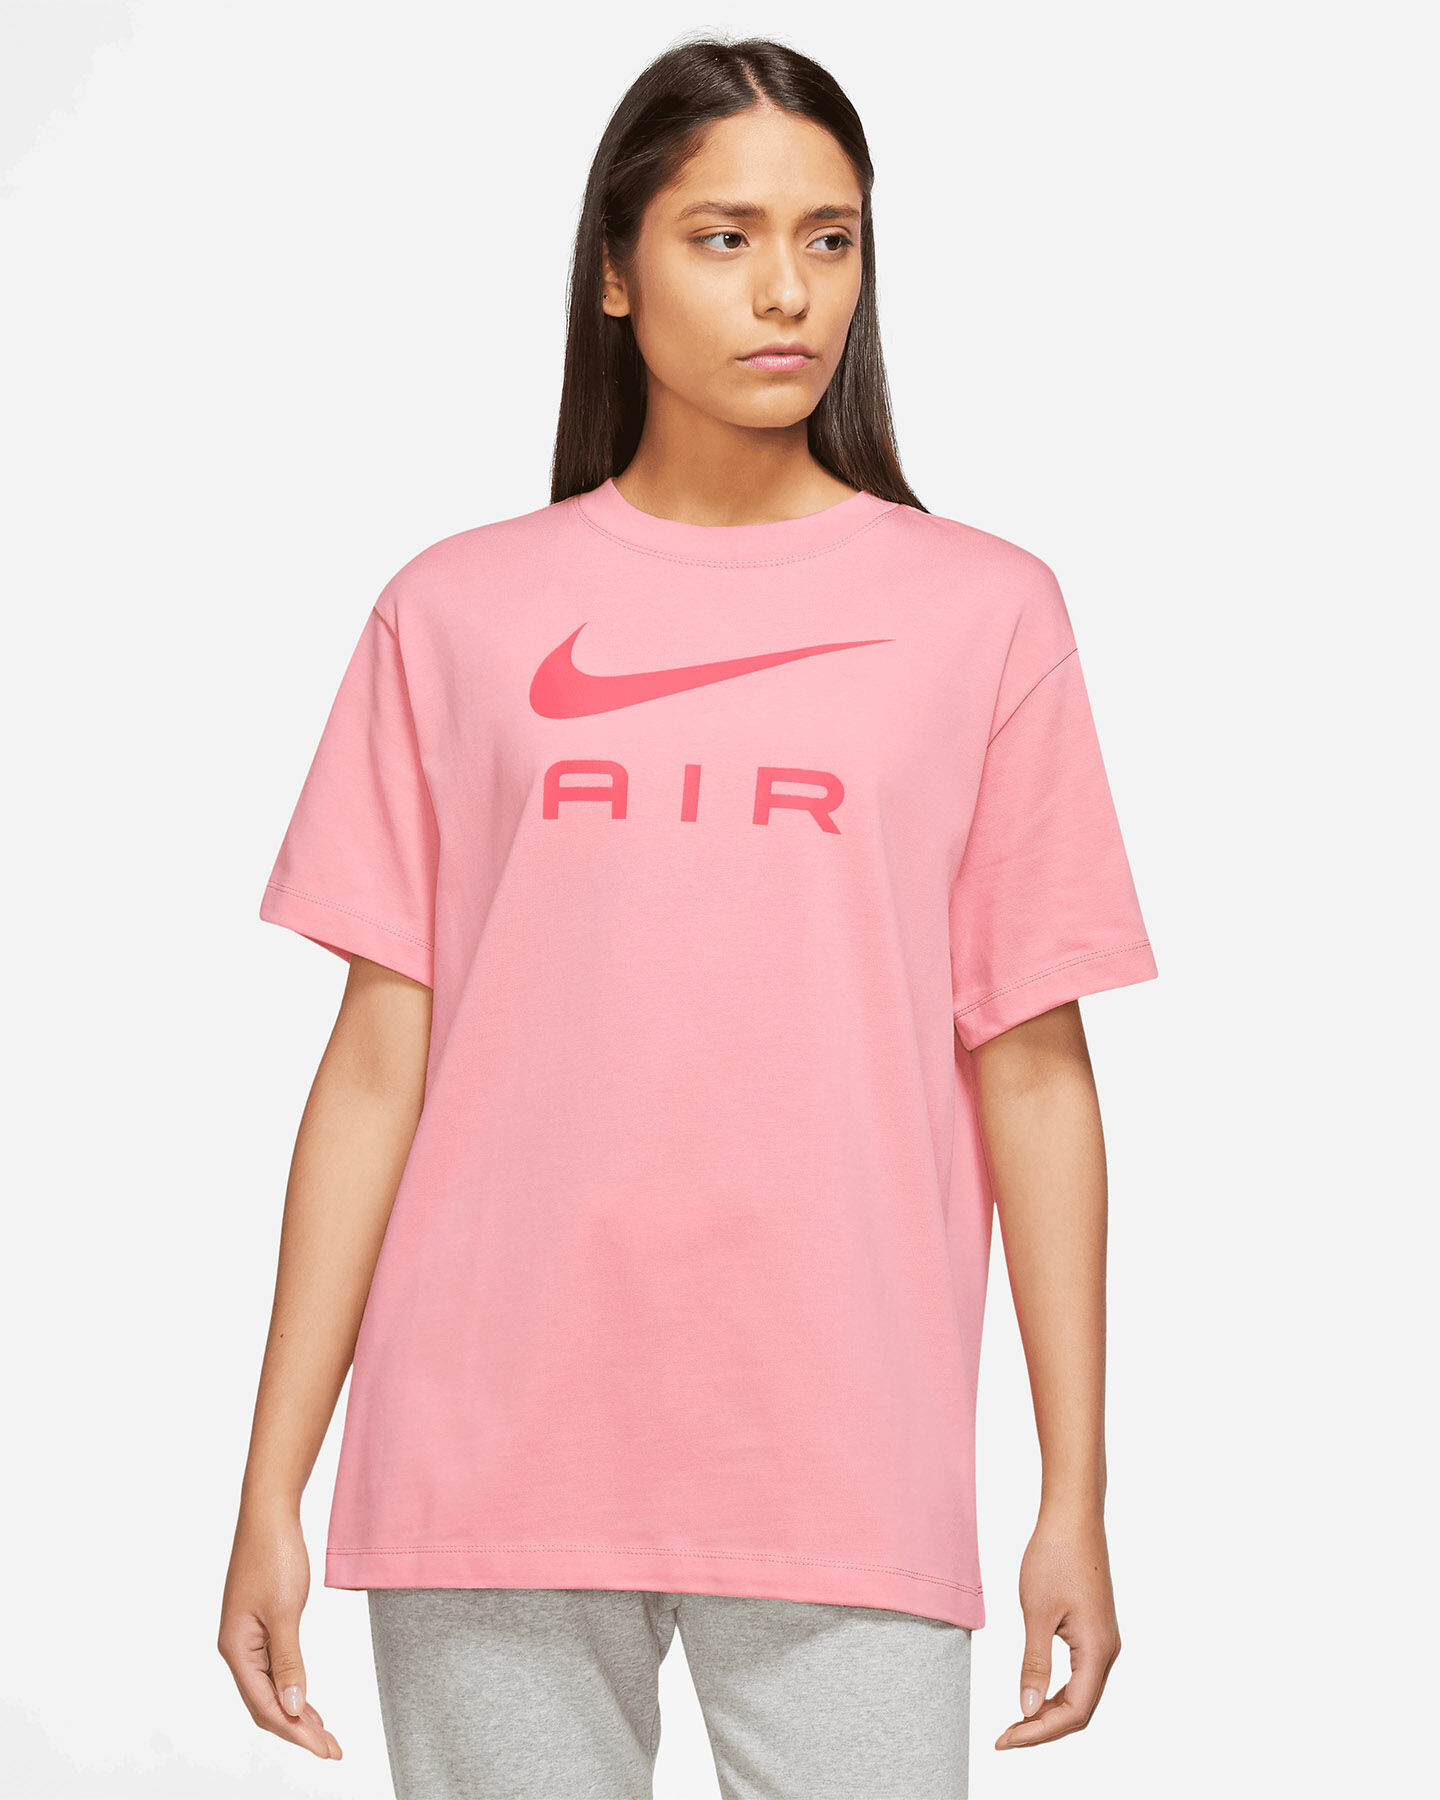  T-Shirt NIKE AIR W S5563334|611|XS scatto 0